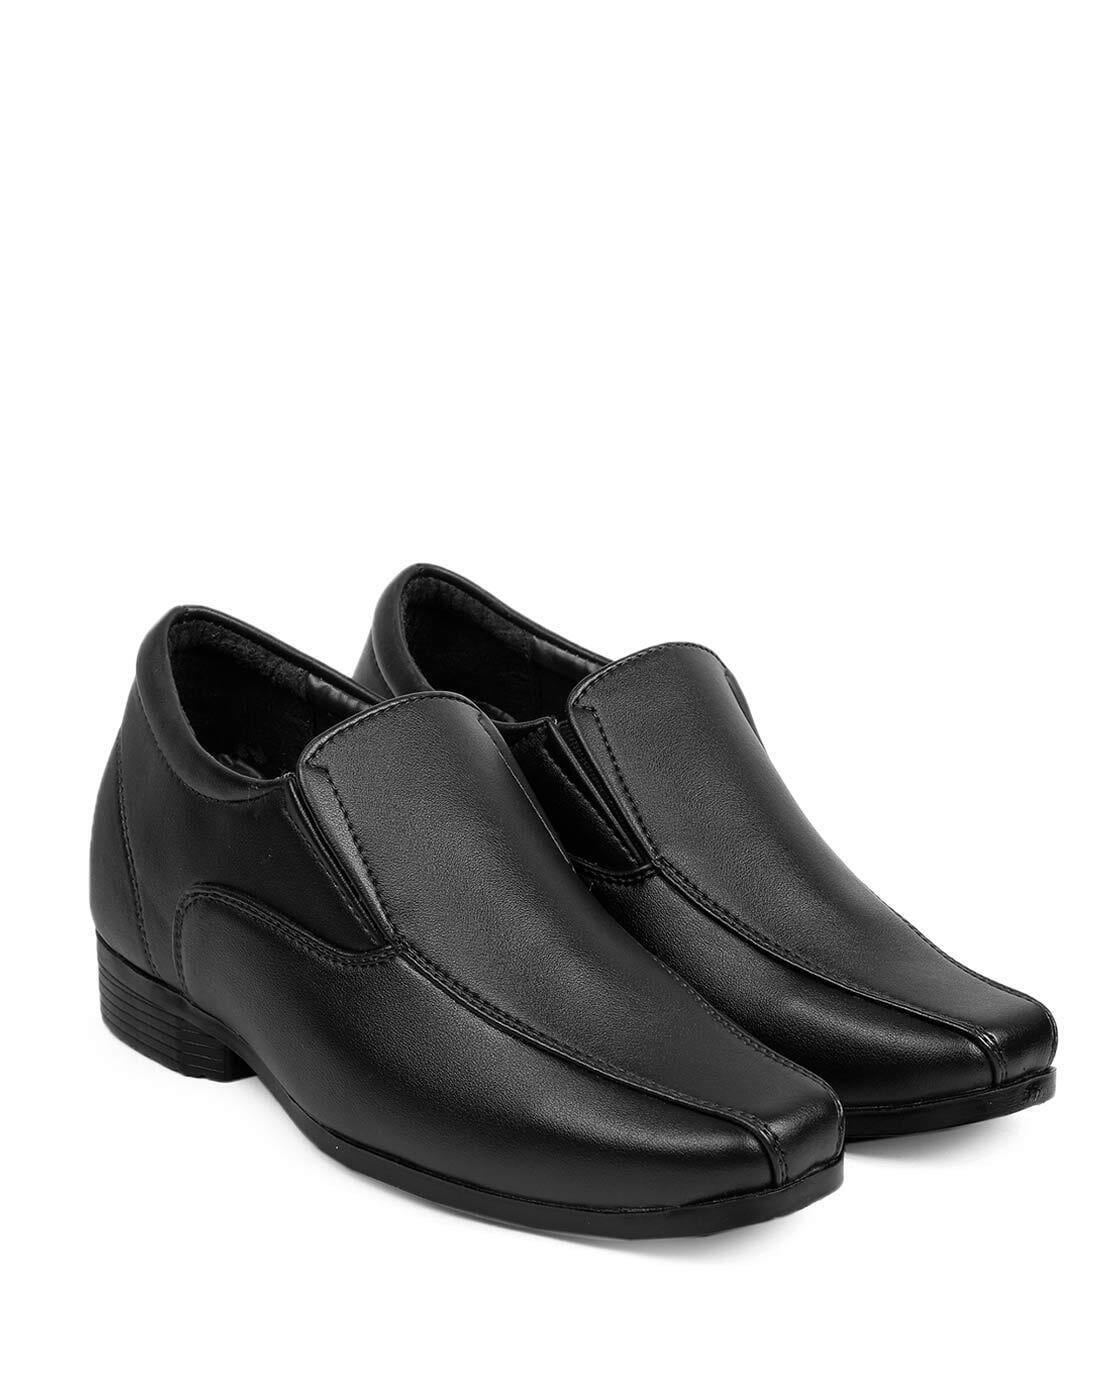 Stylish And Comfortable Black Leather Slip-on Formal Dress Shoes For Men  Heel Size: Flat at Best Price in Saharanpur | Neelkanth Shoes